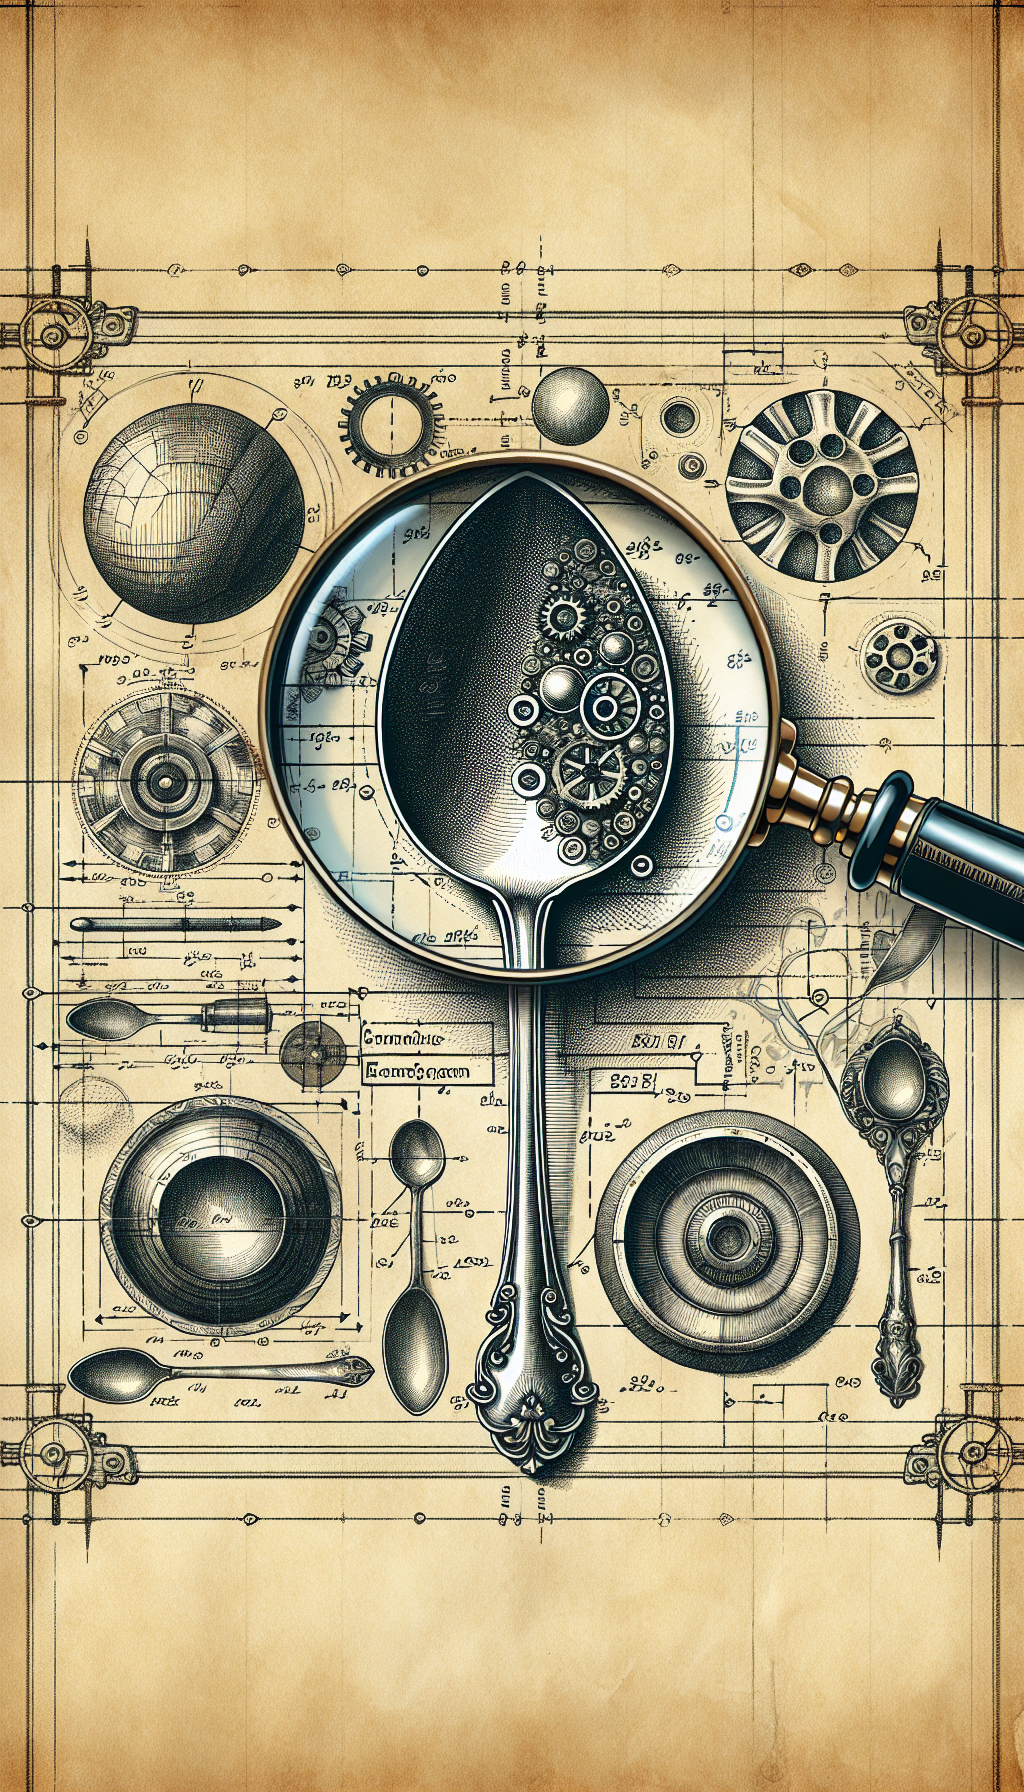 A detailed cross-section of an antique spoon's bowl with magnifying glass highlights, dissecting layers to reveal metal composition, craftsmanship marks, and age signs, amidst a backdrop of a faded craftsman's blueprint. The image has a steampunk aesthetic with intricate, sketched gears and tools bordering the spoon, symbolizing the identification process.